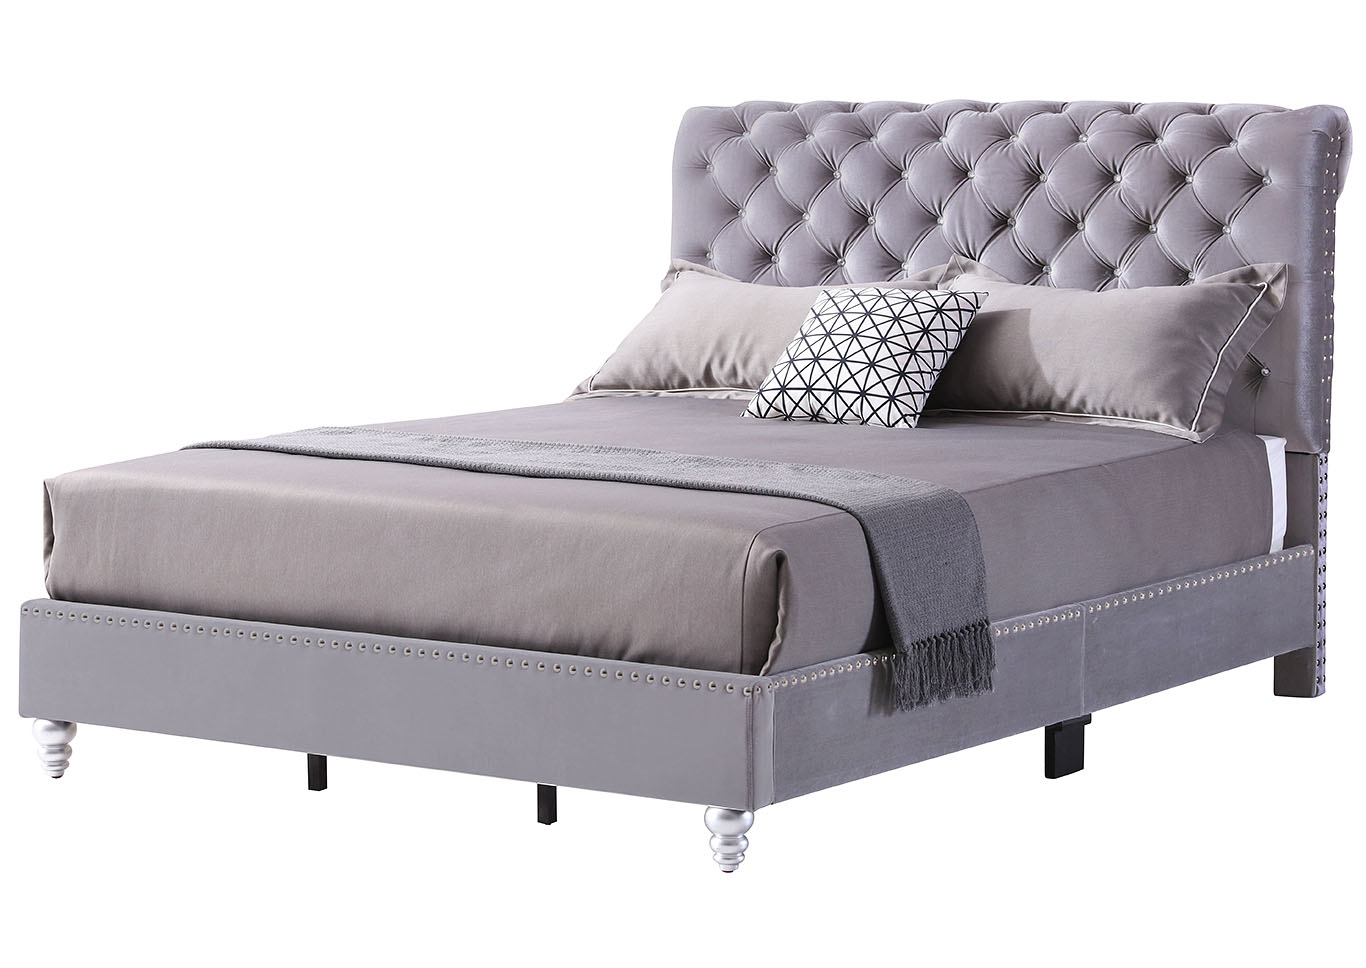 Gray Velvet Micro Suede Tufted Upholstered King Bed,Glory Furniture